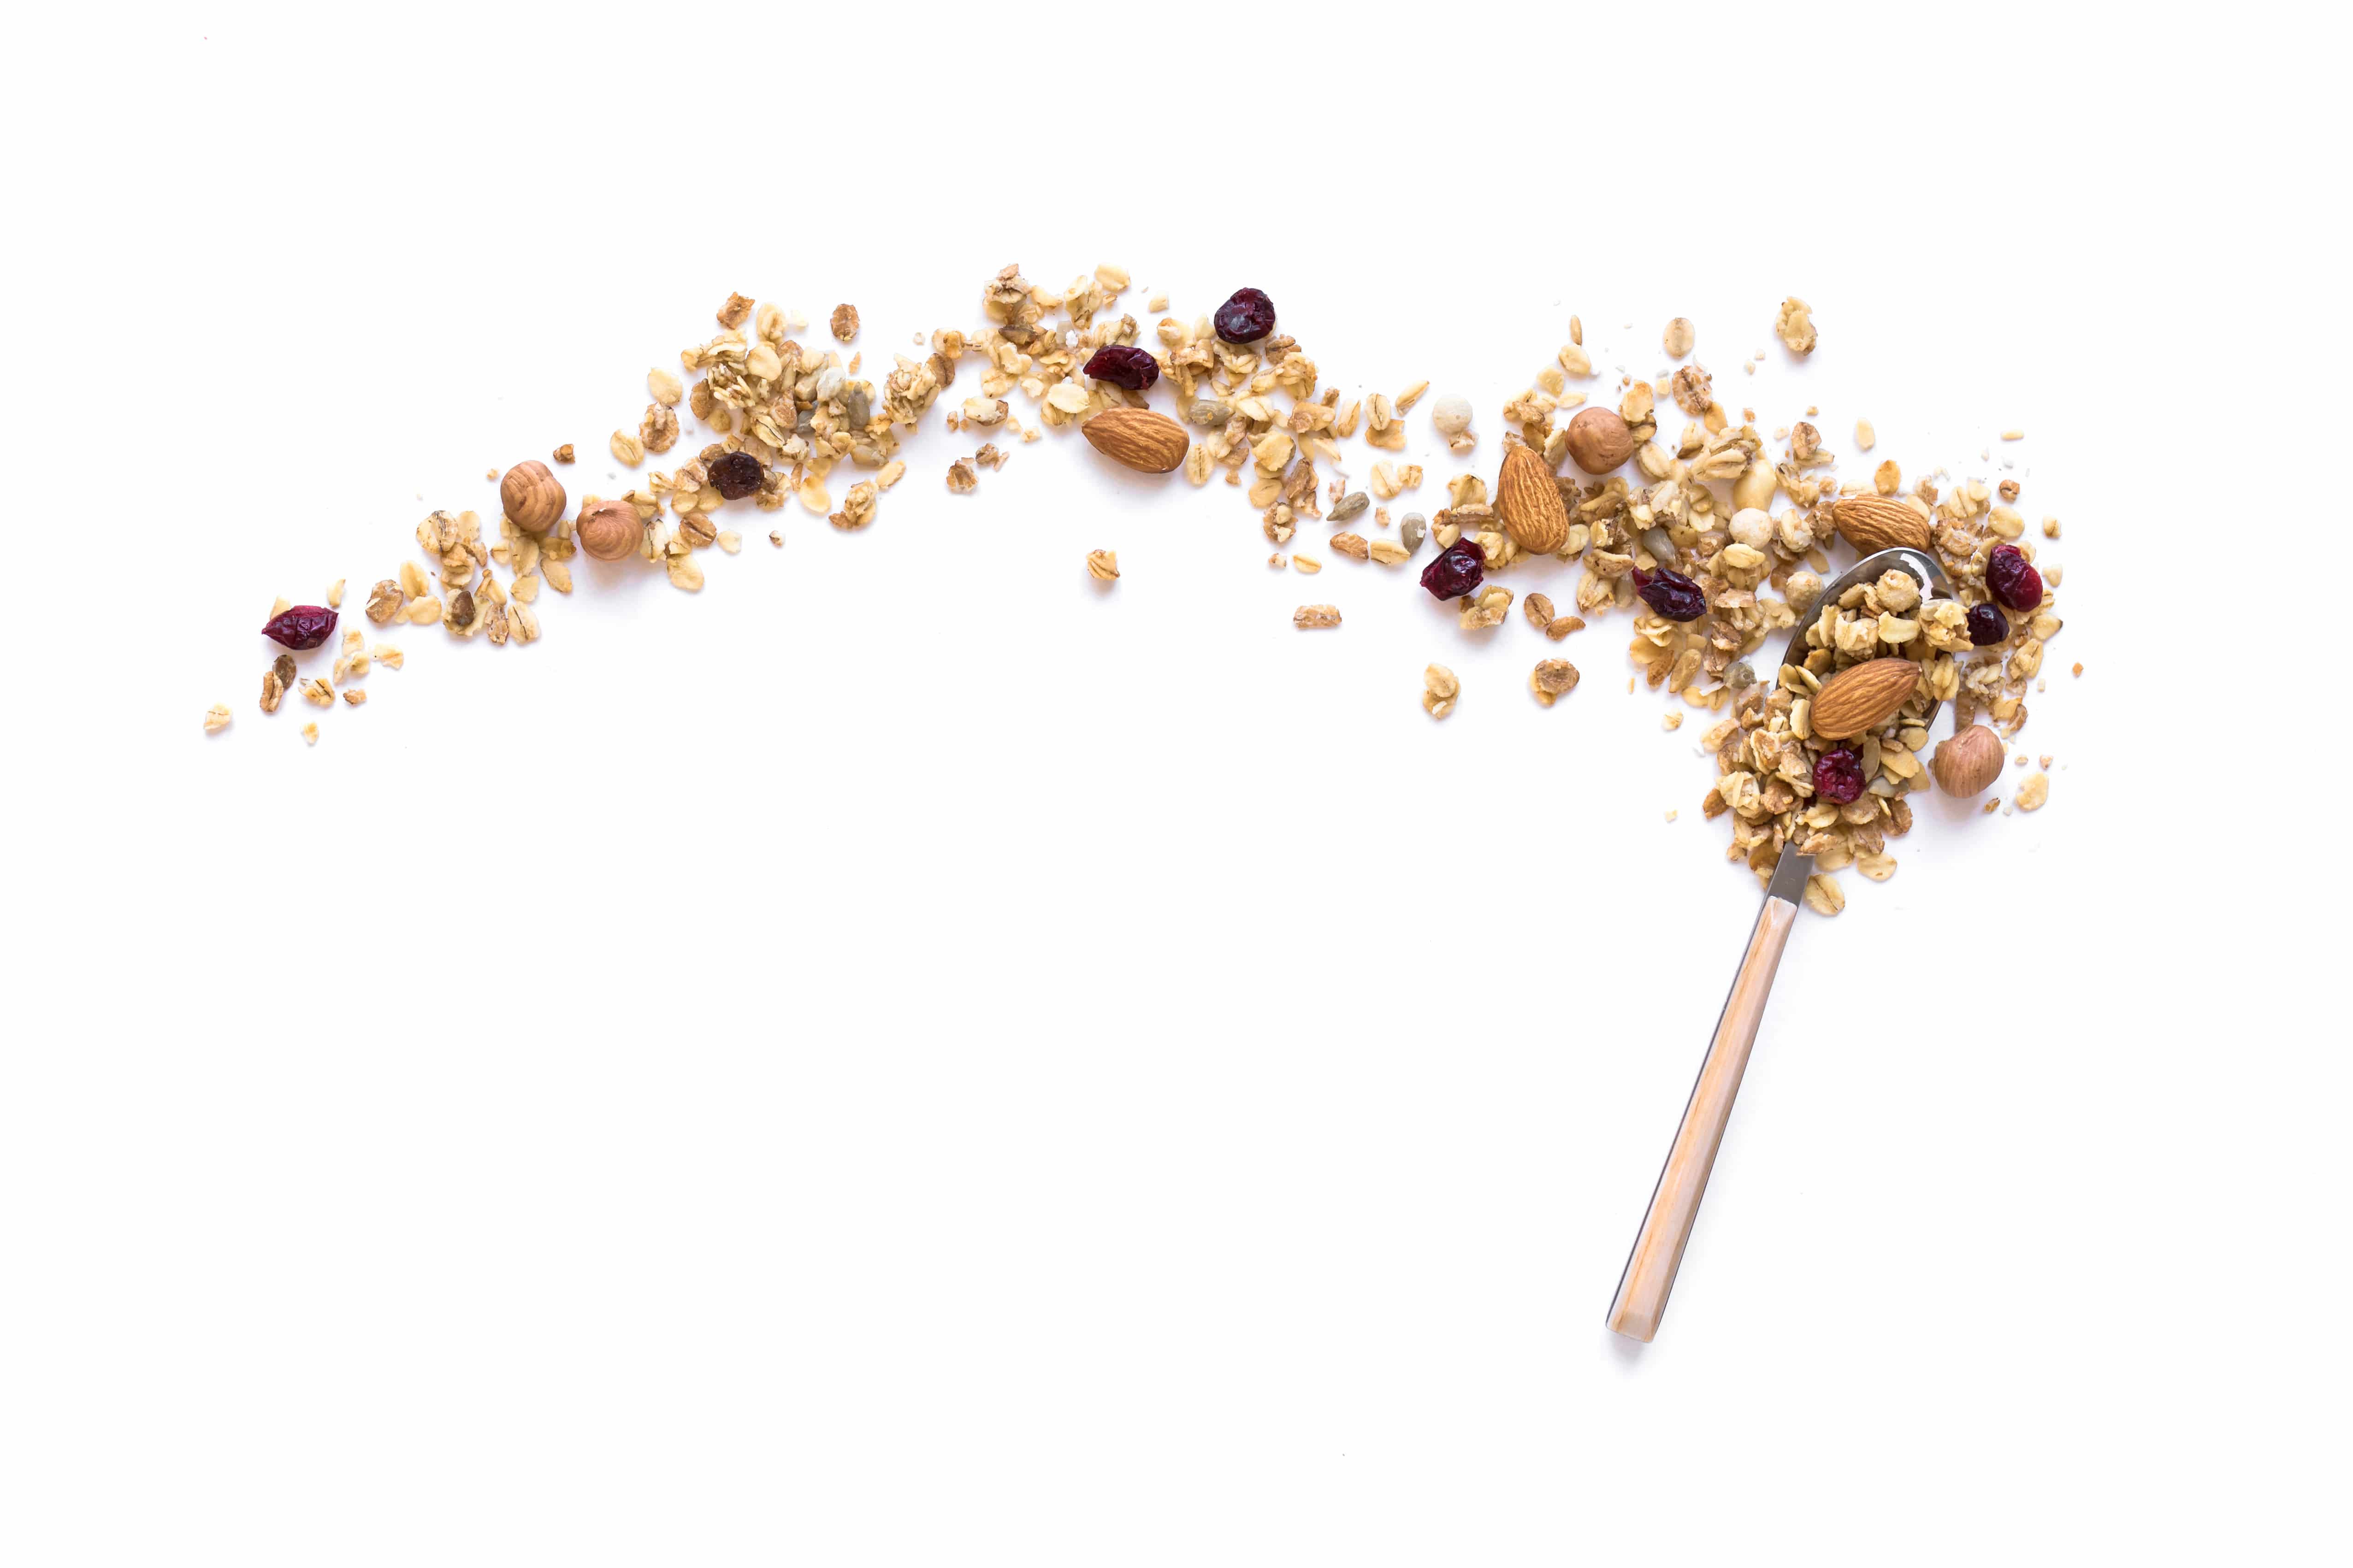 Cereals ready-to-eat: enhancing breakfast value with nuts